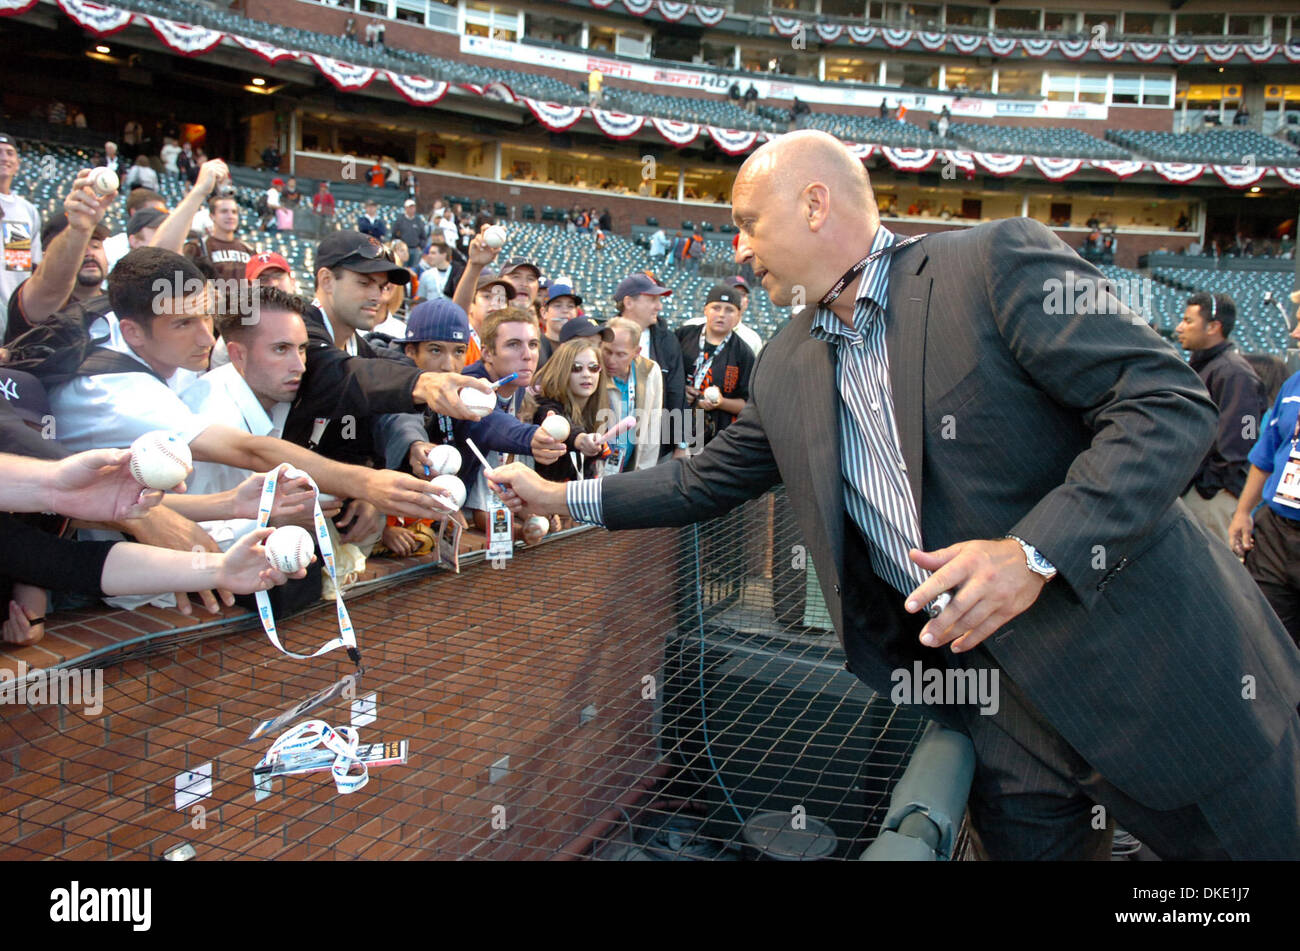 July 9th, 2007 - San Francisco, CA, USA - Former Baltimore Orioles Cal Ripken Jr. signs autographs for fans following the All-Star Home Run Derby at AT&T Park in San Francisco on July 9, 2007. (Credit Image: © Sean Connelley/The Oakland Tribune/ZUMA Press) Stock Photo